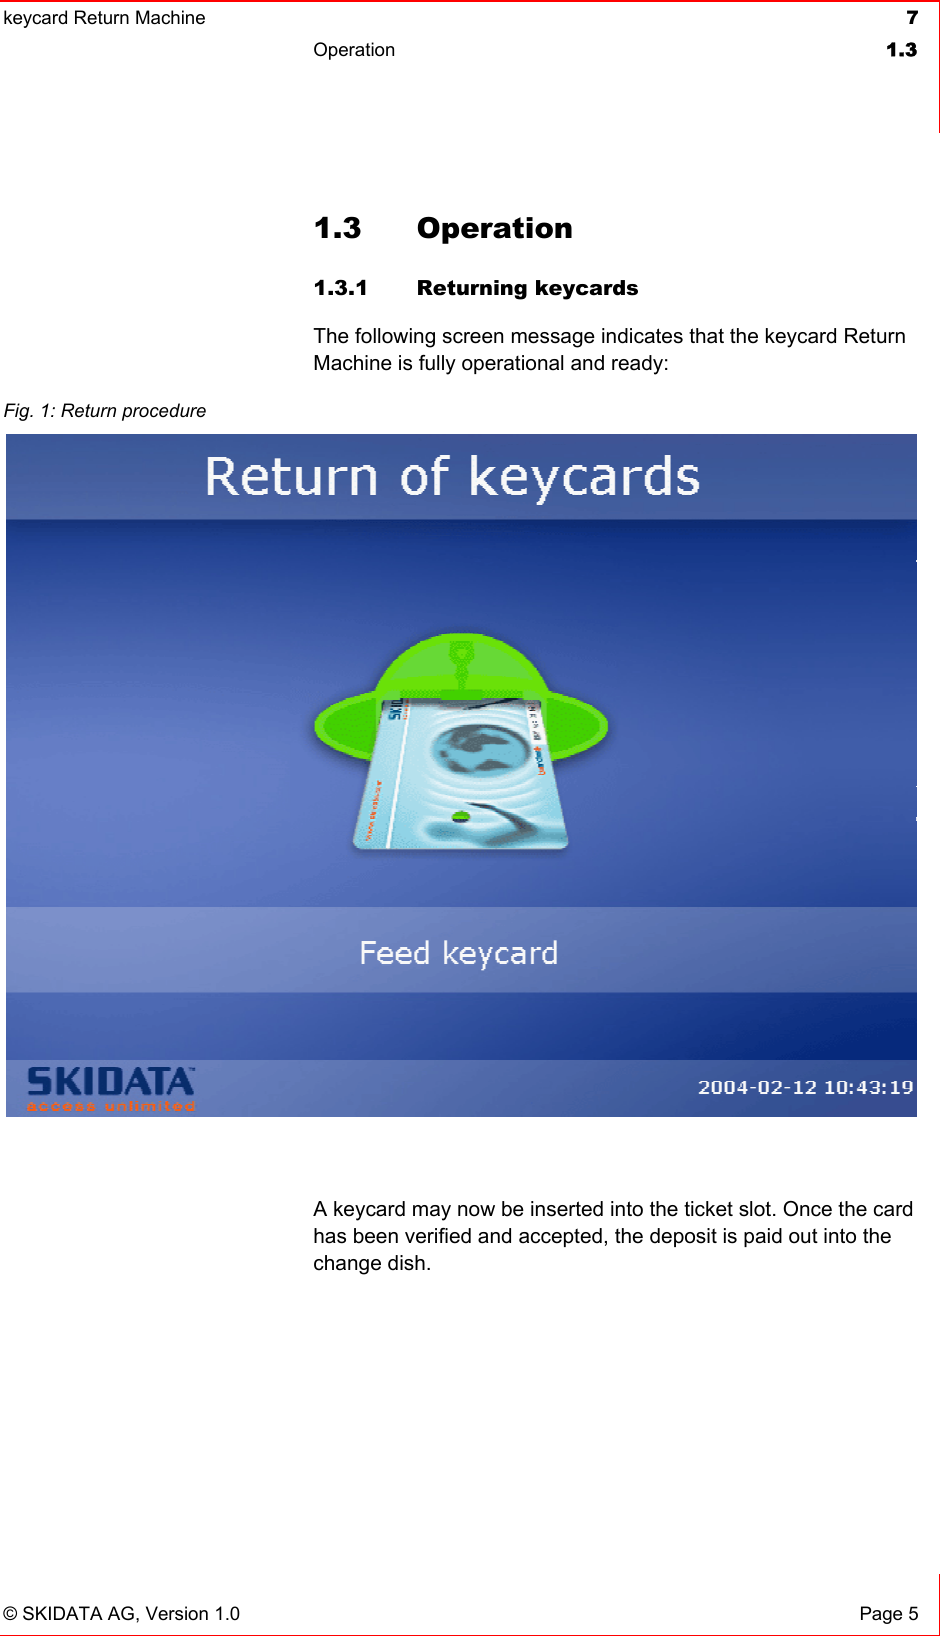 keycard Return Machine  7Operation 1.3© SKIDATA AG, Version 1.0  Page 5 1.3 Operation  1.3.1 Returning keycards The following screen message indicates that the keycard Return Machine is fully operational and ready: A keycard may now be inserted into the ticket slot. Once the card has been verified and accepted, the deposit is paid out into the change dish. Fig. 1: Return procedure 